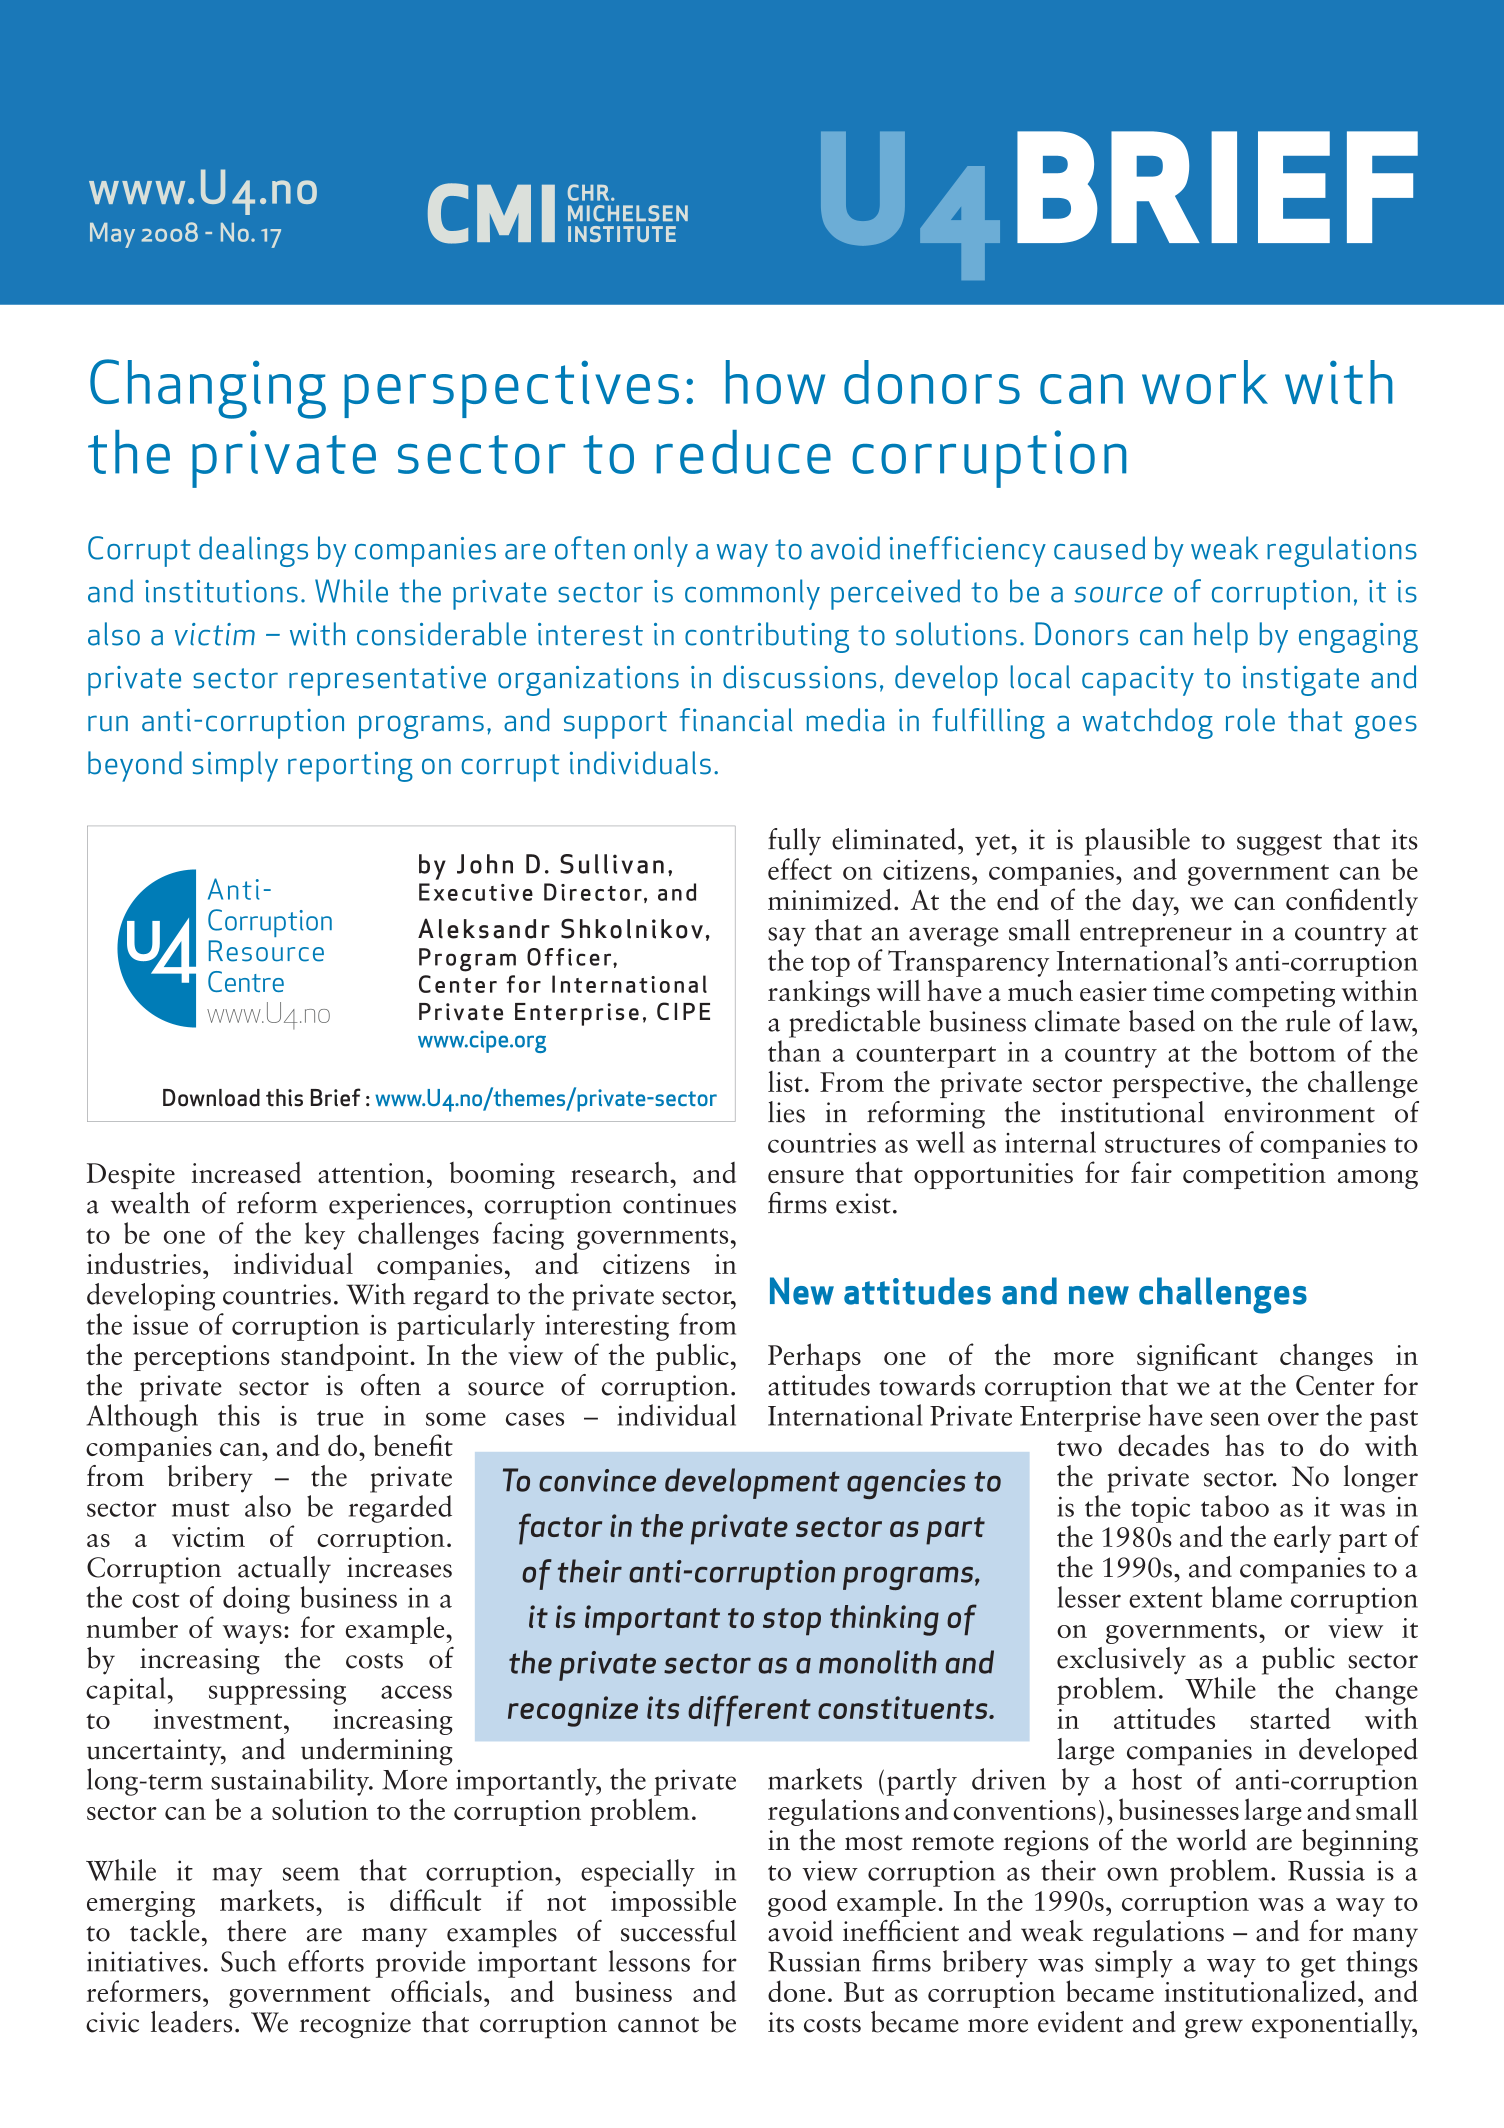 Changing Perspectives: How Donors can Work with the Private Sector to Reduce Corruption